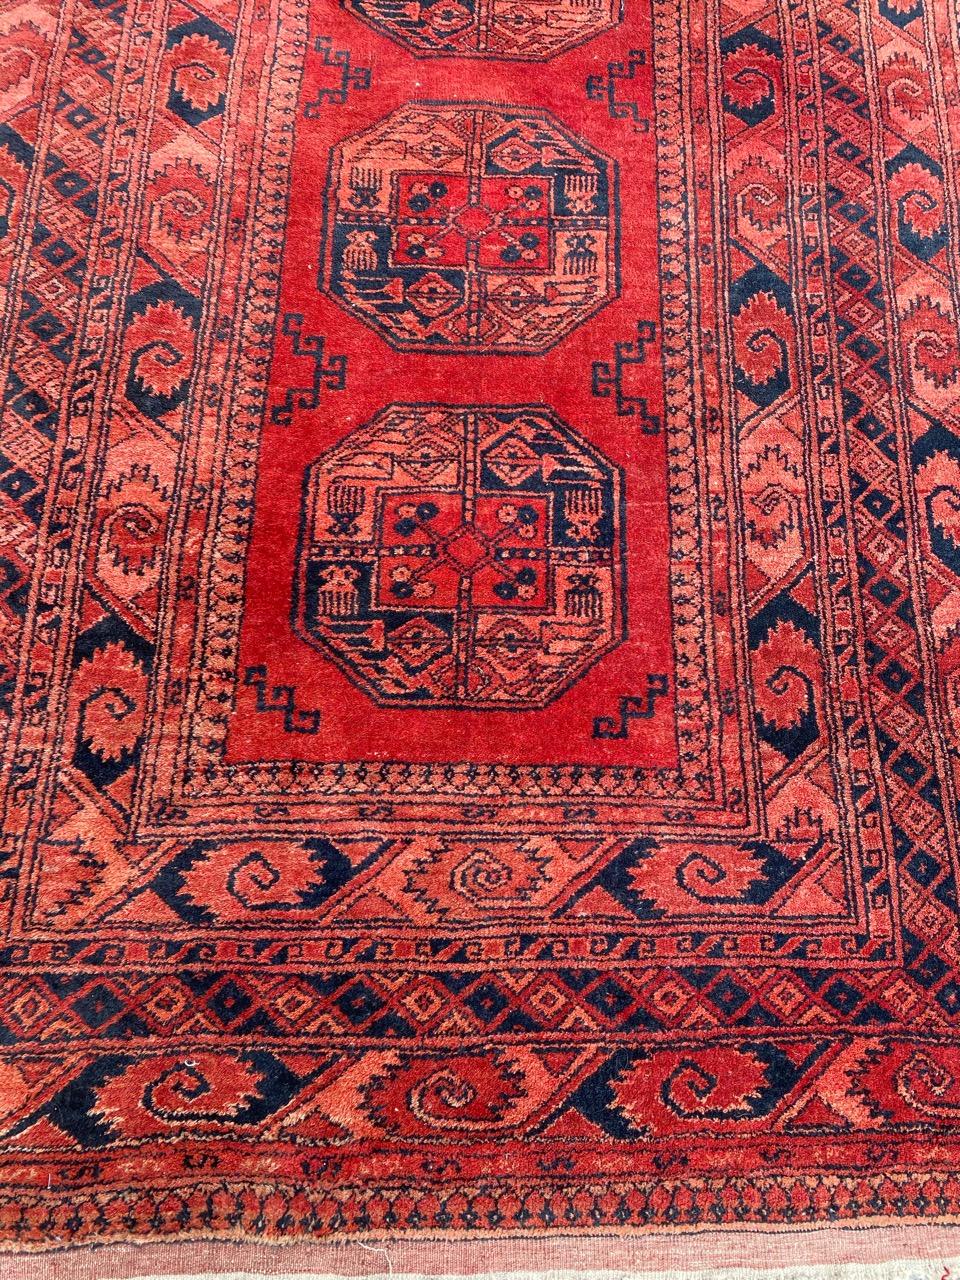 Beautiful 20th century Turkmen rug with geometrical design and nice red field color, entirely hand knotted with wool velvet on wool foundation.